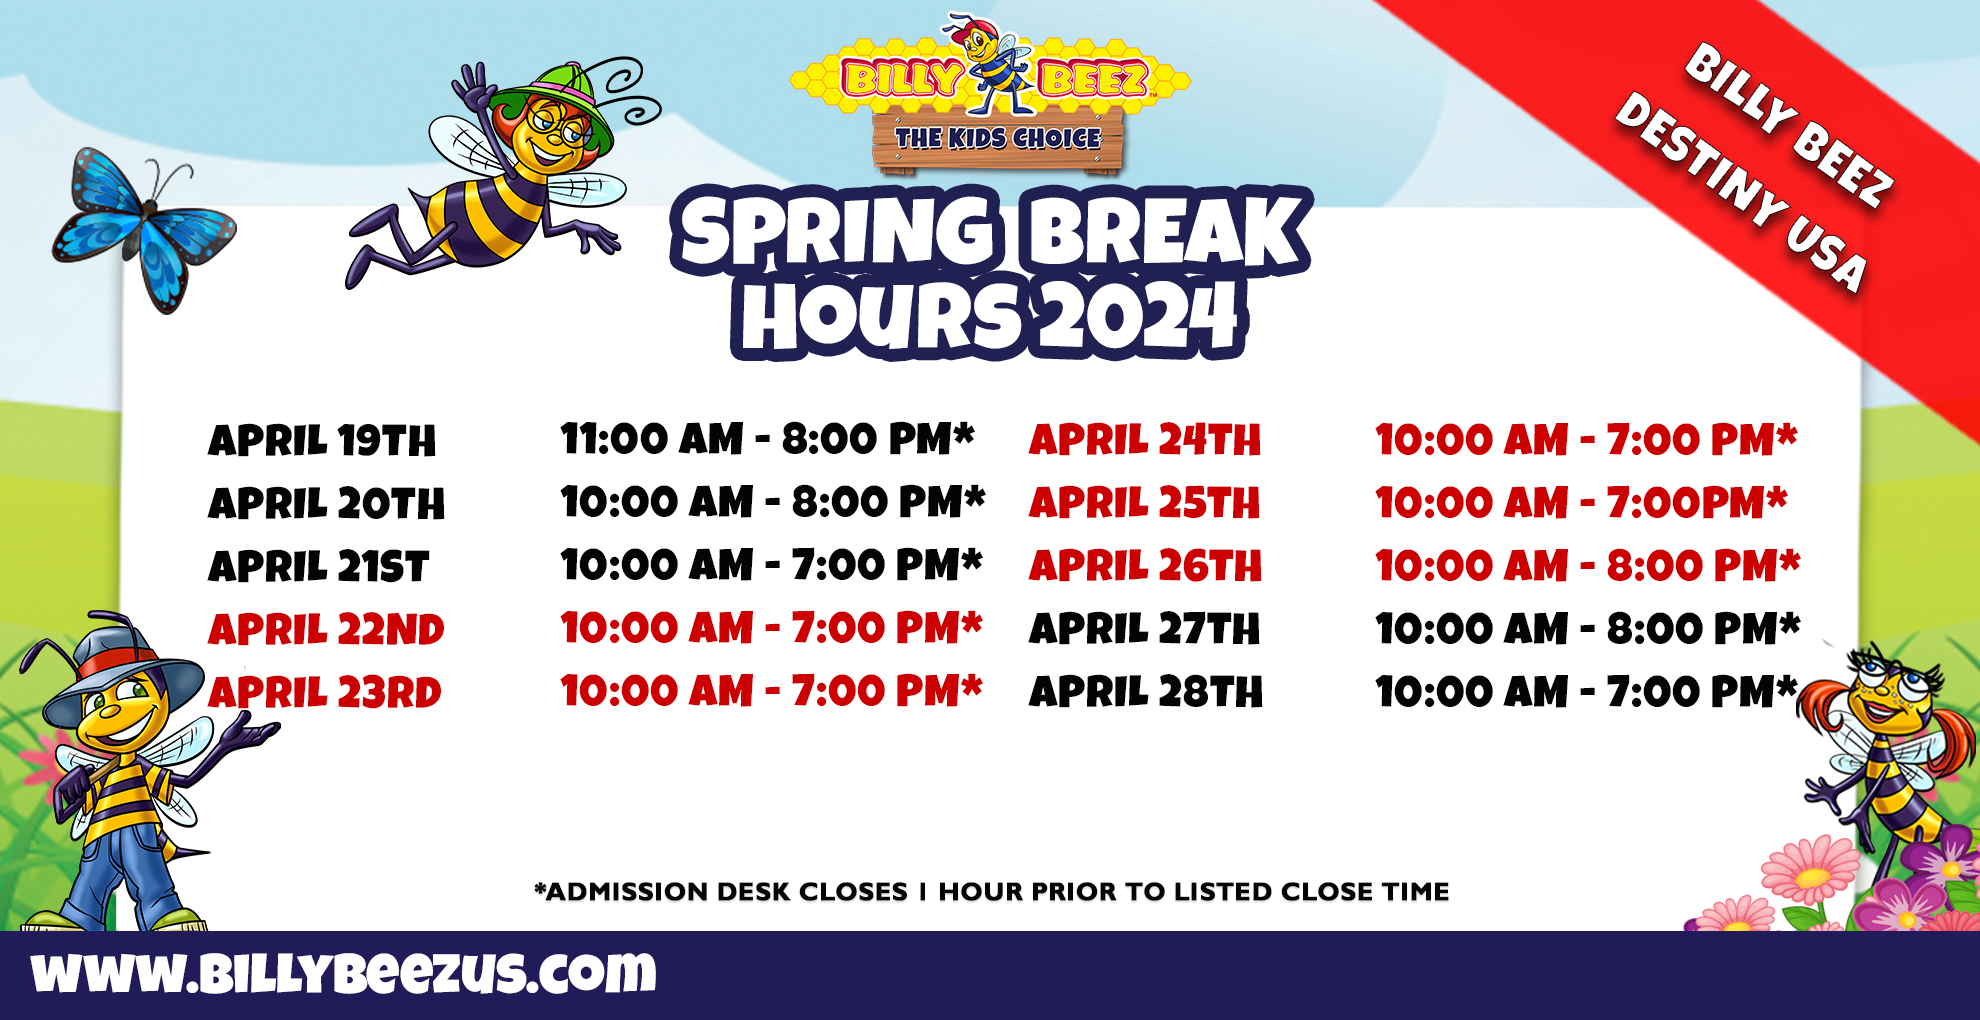 Billy Beez The Kids Place Billy Beez Destiny USA Spring Break Hours 2024 April 19th 11:00am-8:00am* April 20th 10:00am-8:00pm* April 21st 10:00am-7:00pm* April 22nd 10:00am-7:00pm* April 23rd 10:00am-7:00pm* April 24th 10:00am-7:00pm* April 25th 10:00am-7:00pm* April 26th 10:00am-8:00pm* April 27th 10:00am-8:00pm* April 28th 10:00am-7:00pm* *Admission desk closes 1 hour prior to listed close time